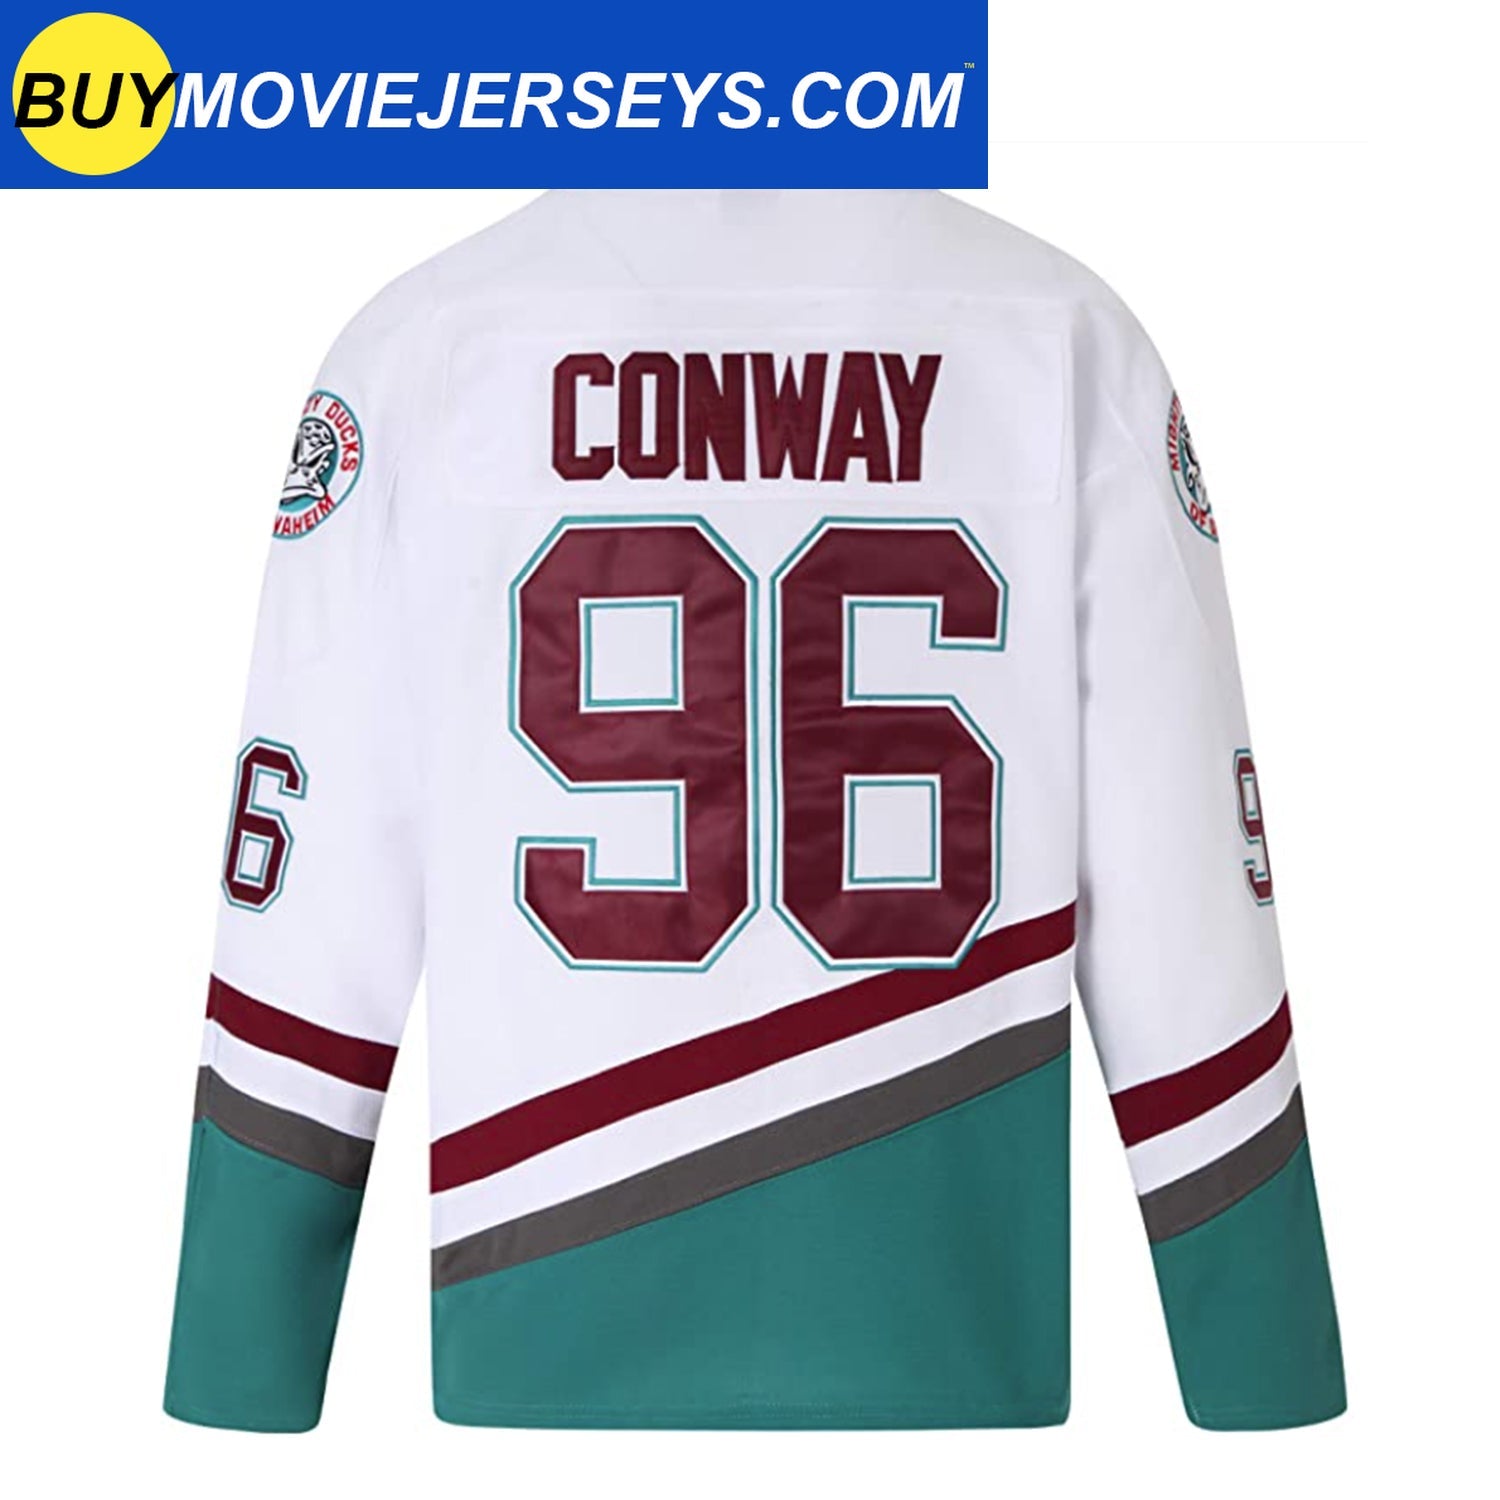 Vintage Mighty Ducks Charlie Conway Jersey Size 2X-Large